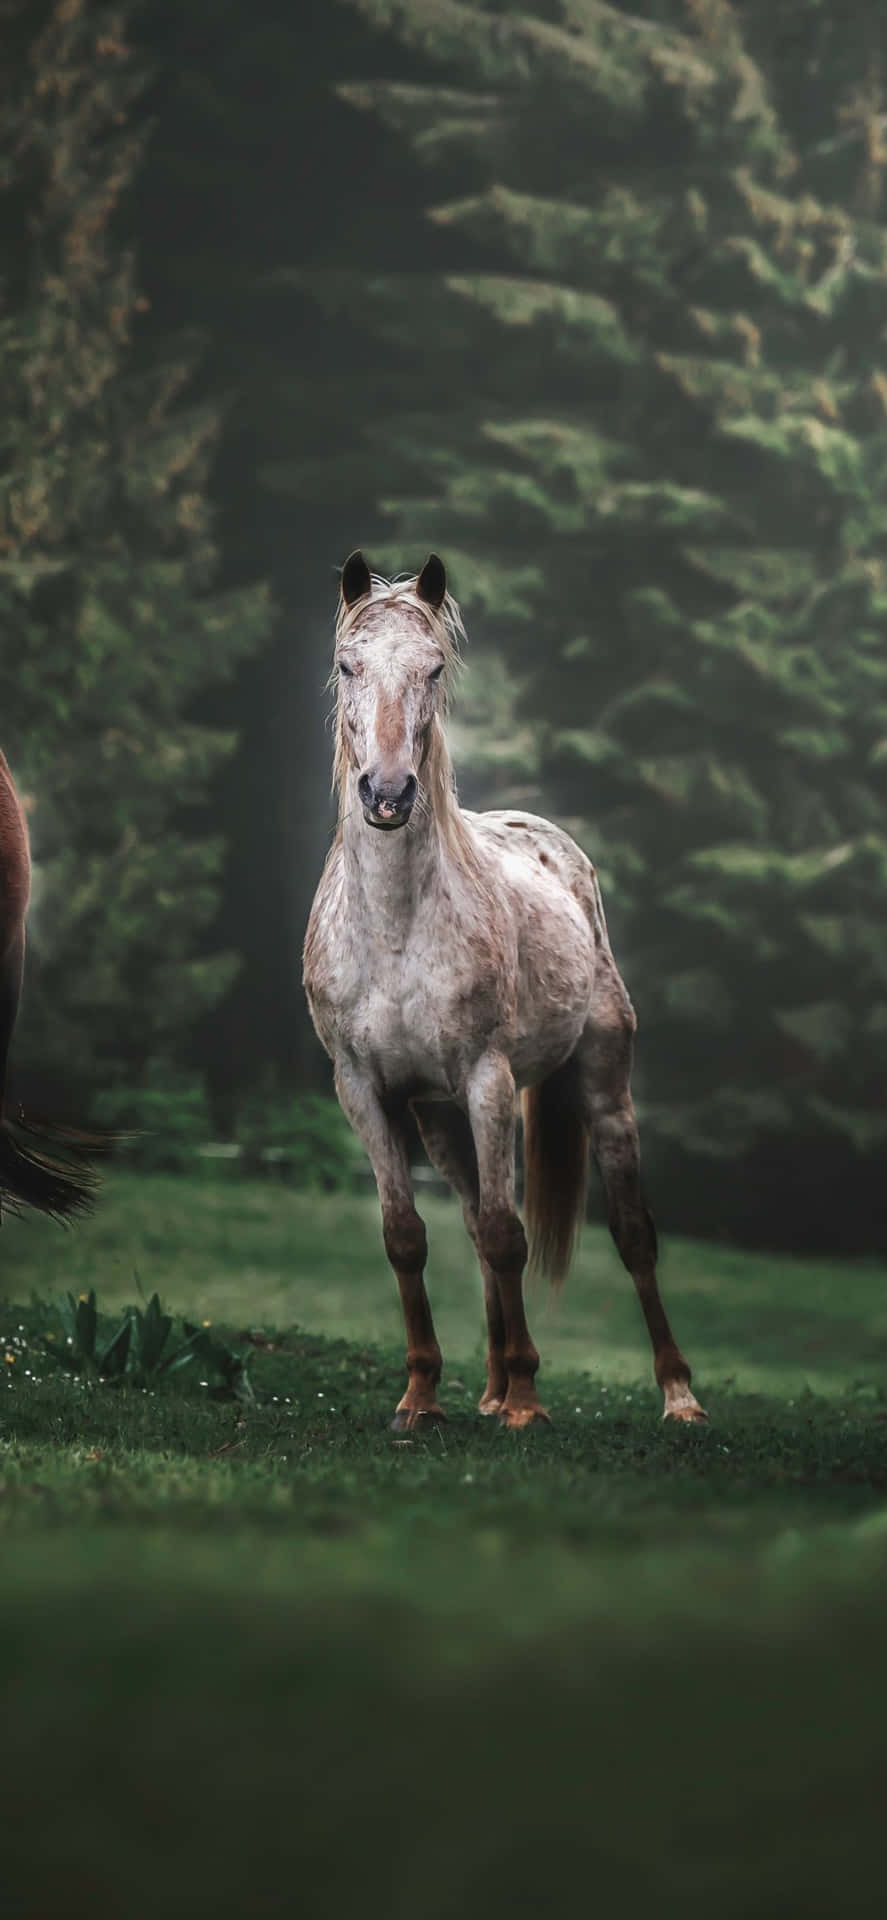 Two Horses Standing In A Field Wallpaper